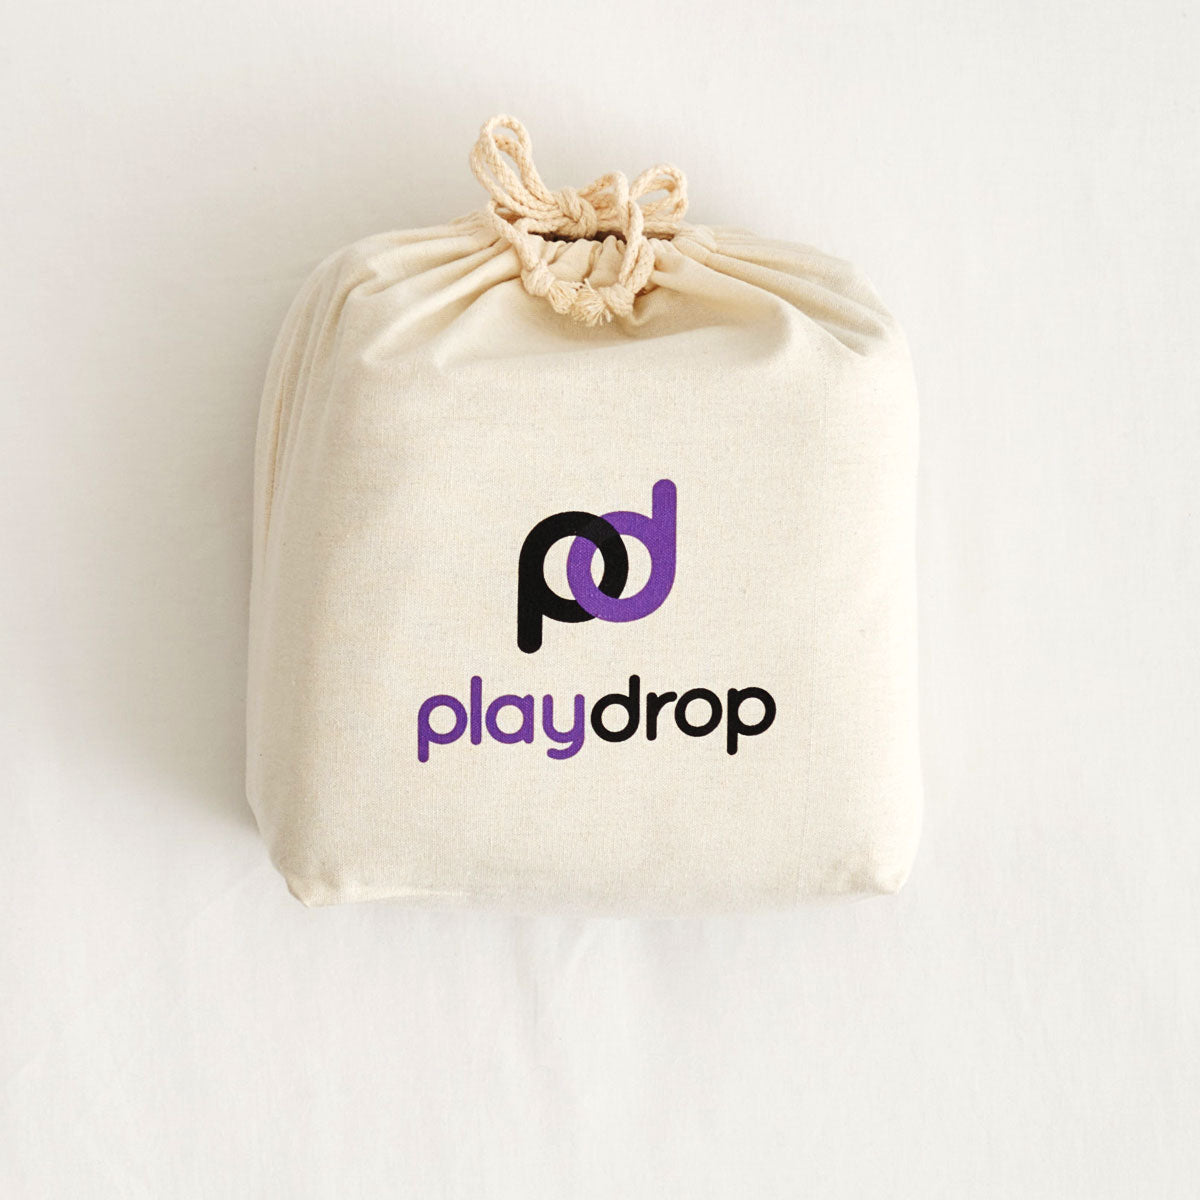 playdrop sex mat inside carrying pouch with logo